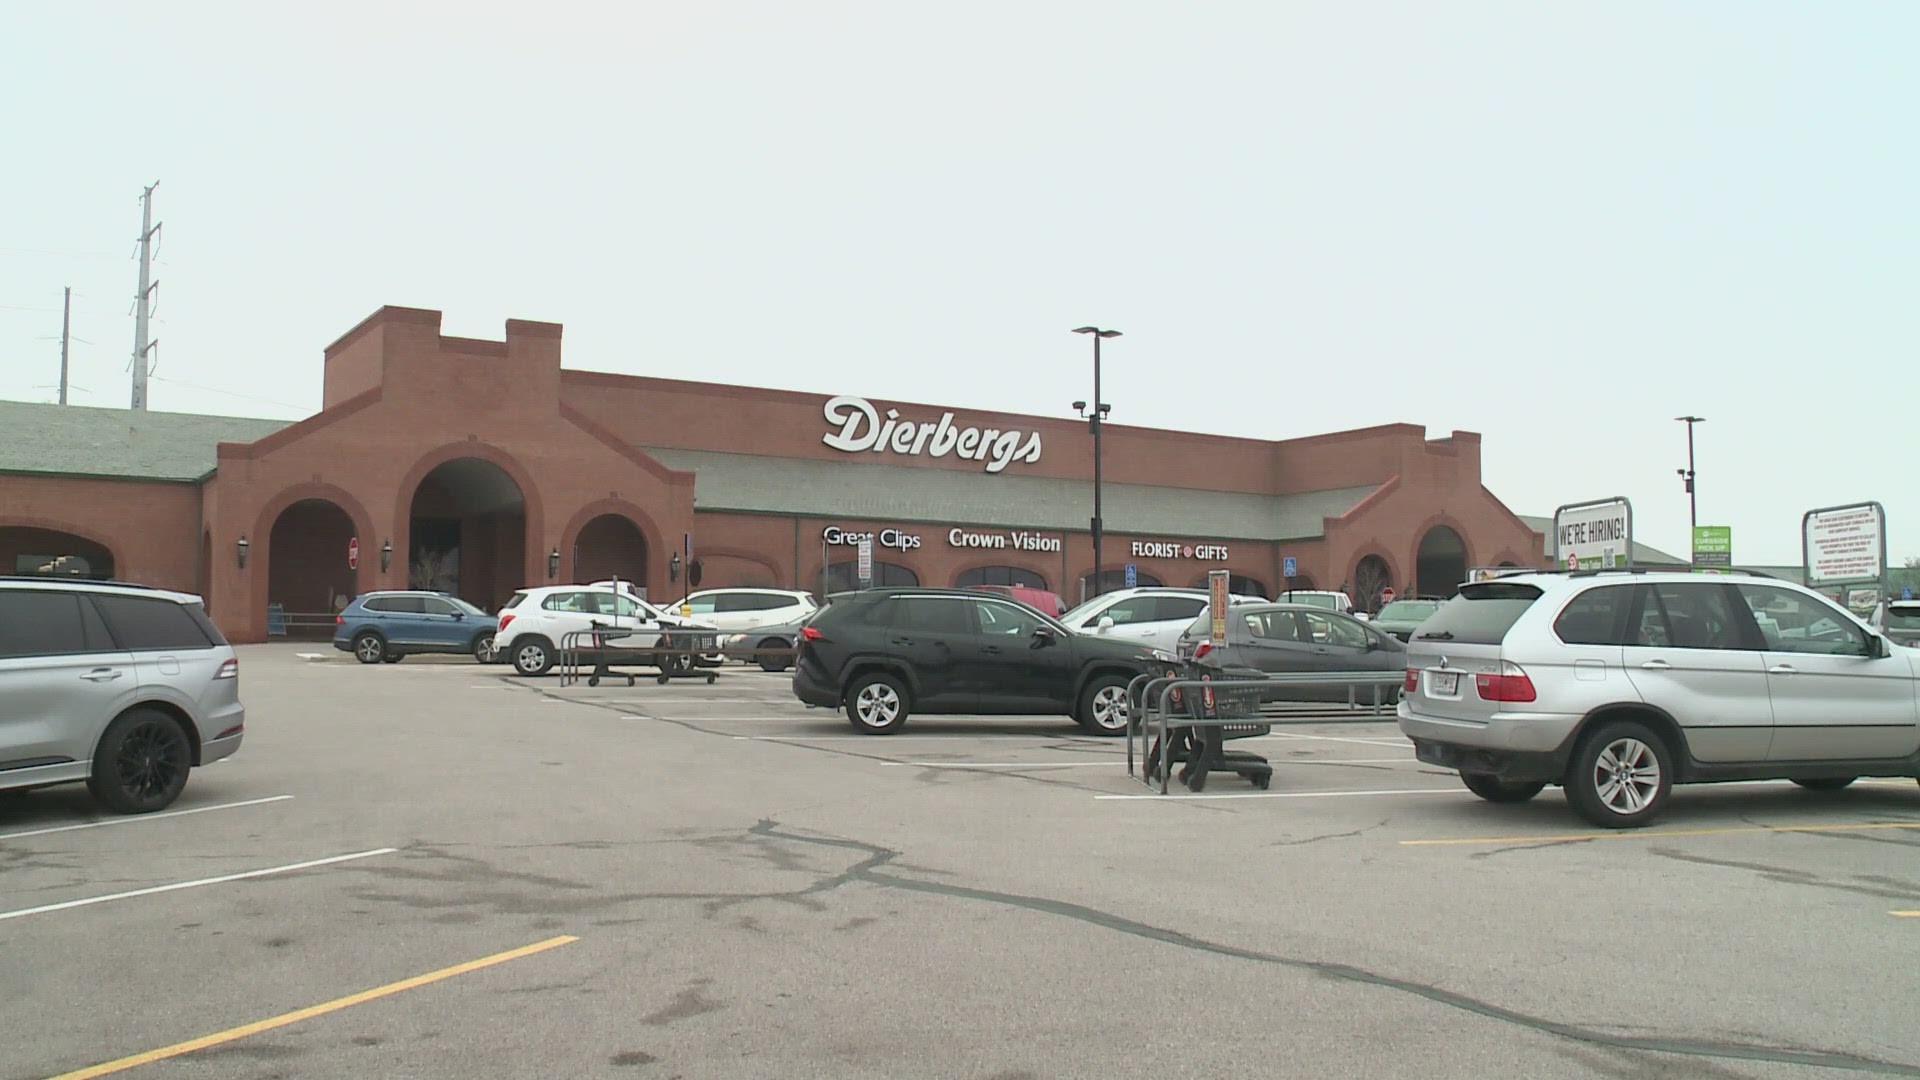 Dierbergs said that its current self-checkout policy isn't changing anytime soon. Schnucks said the chain's self-checkouts will start limiting purchases to 10 items.